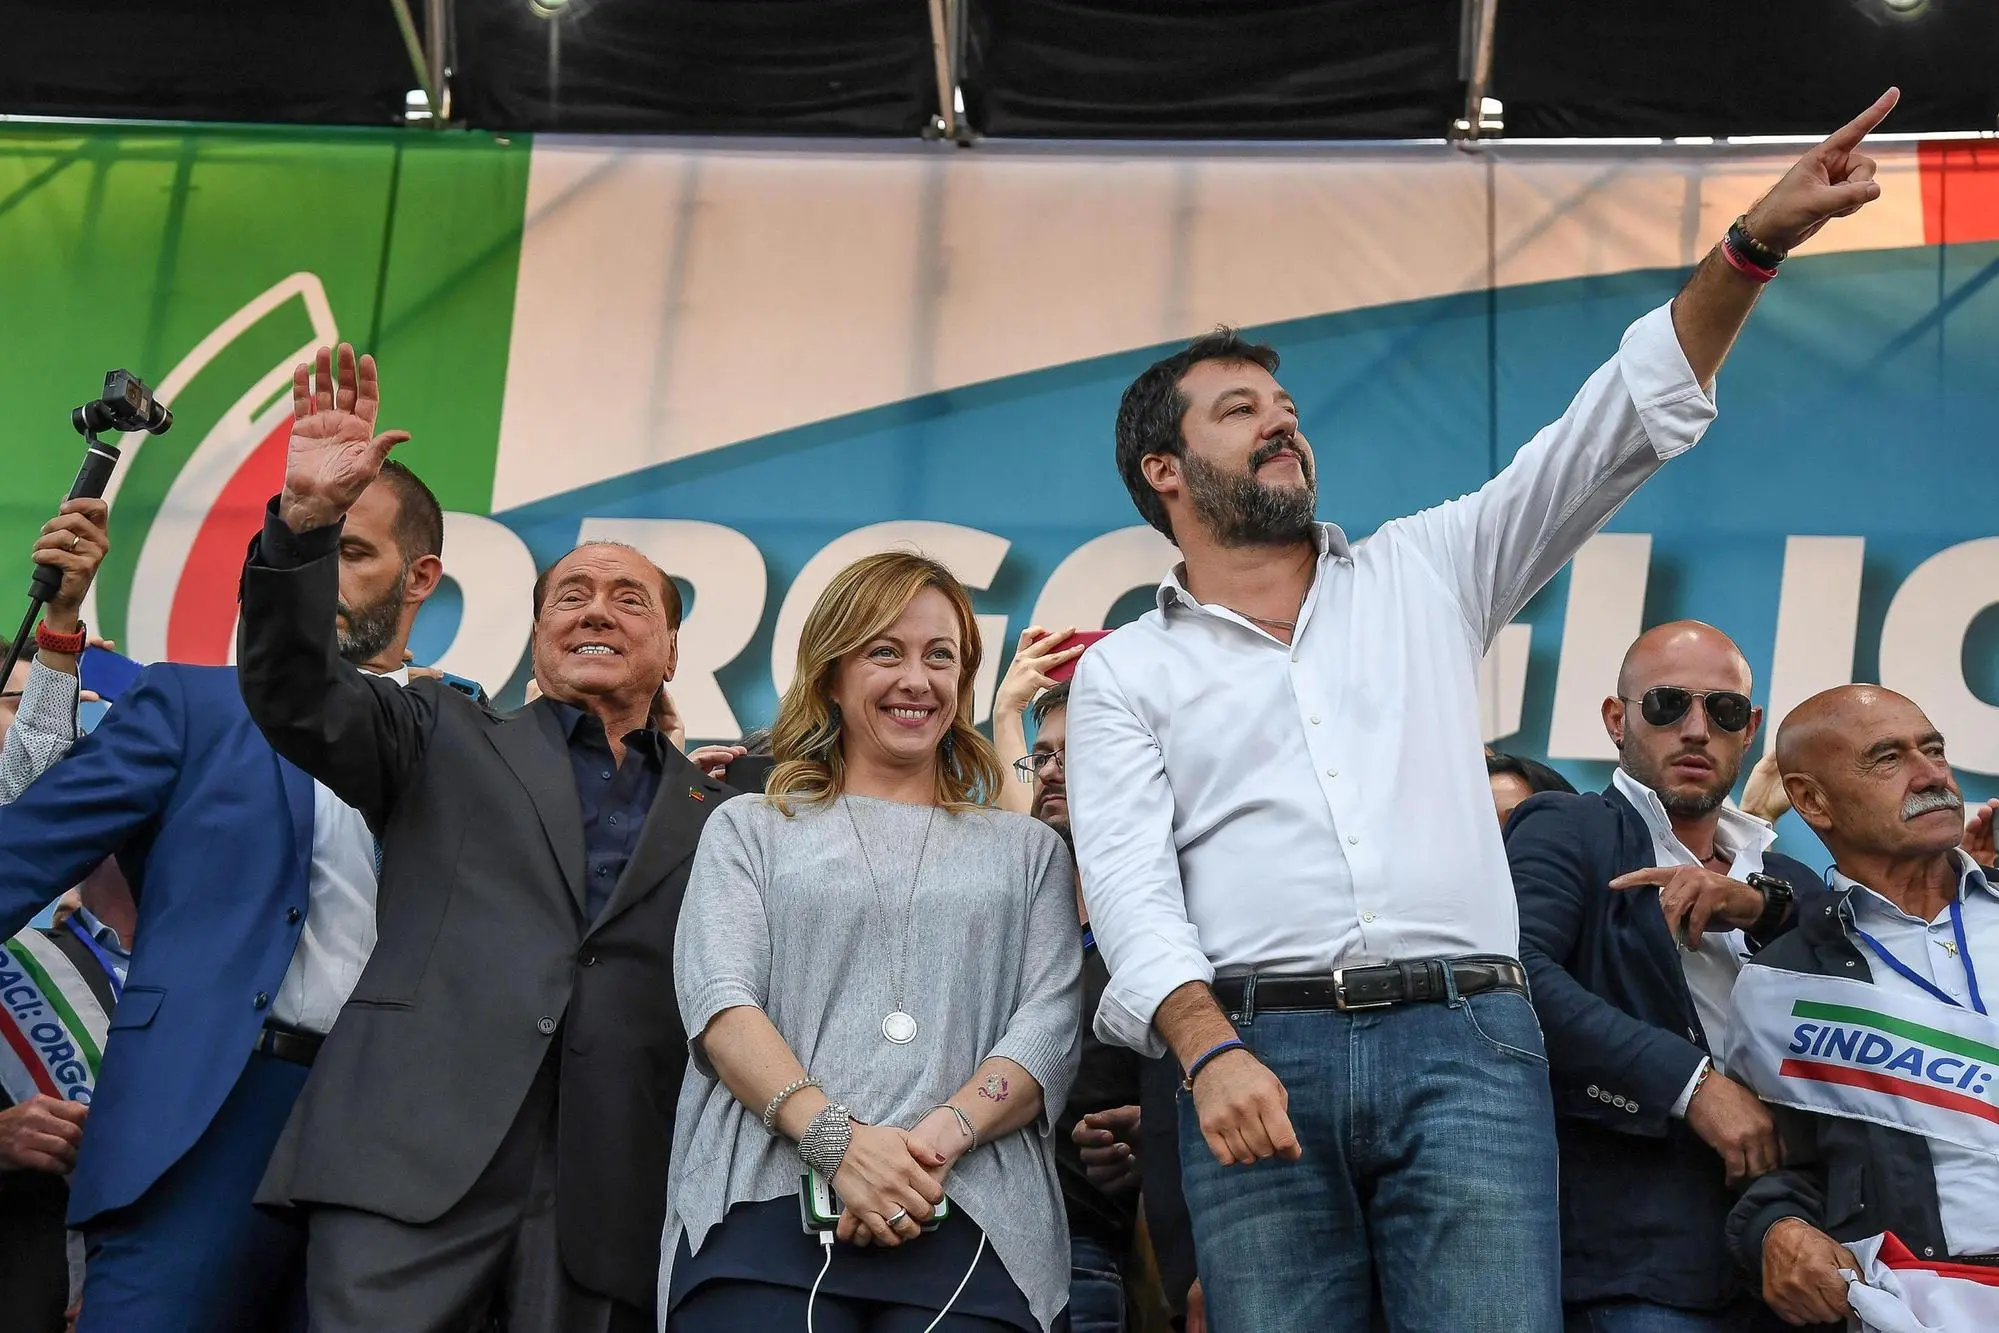 (L-R) Leader of Forza Italia party, Silvio Berlusconi, Leader of Fratelli d'Italia (Brothers of Italy) party, Giorgia Meloni and the Secretary of Lega party Matteo Salvini during the anti-government rally called by the League party in Rome, IItaly, 19 October 2019. ANSA/ALESSANDRO DI MEO